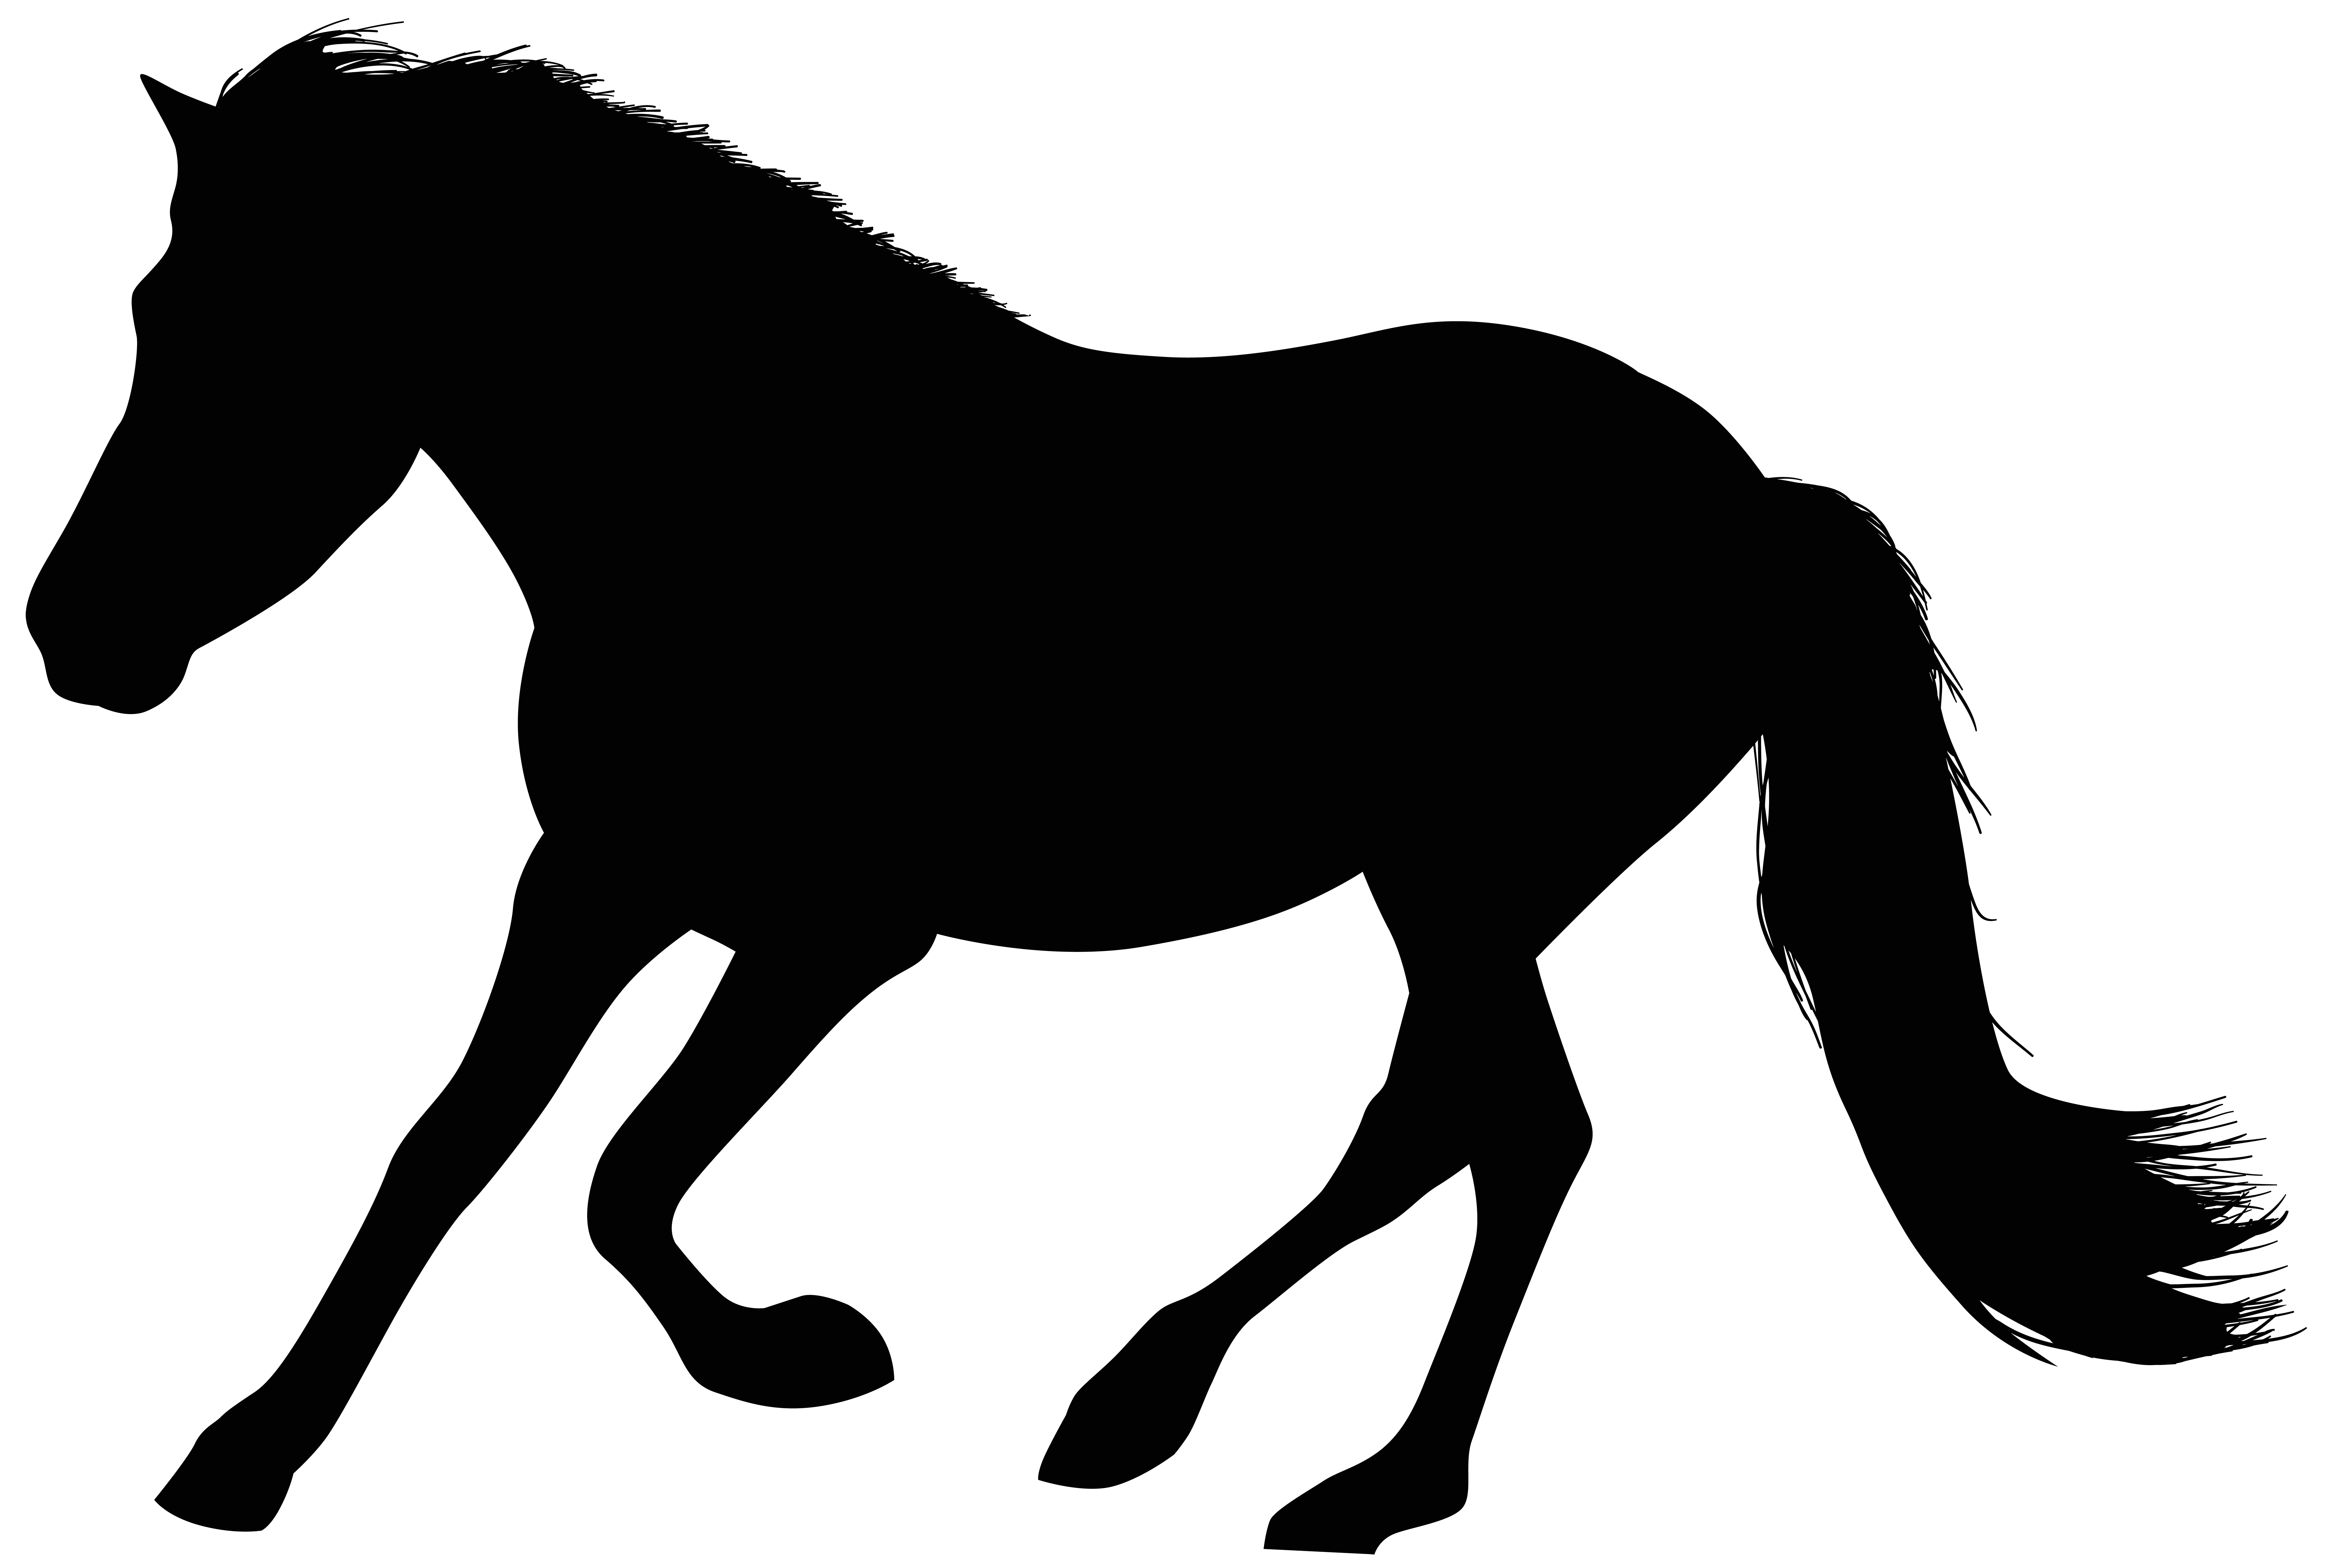 Running silhouette at getdrawings. Clipart dogs horse